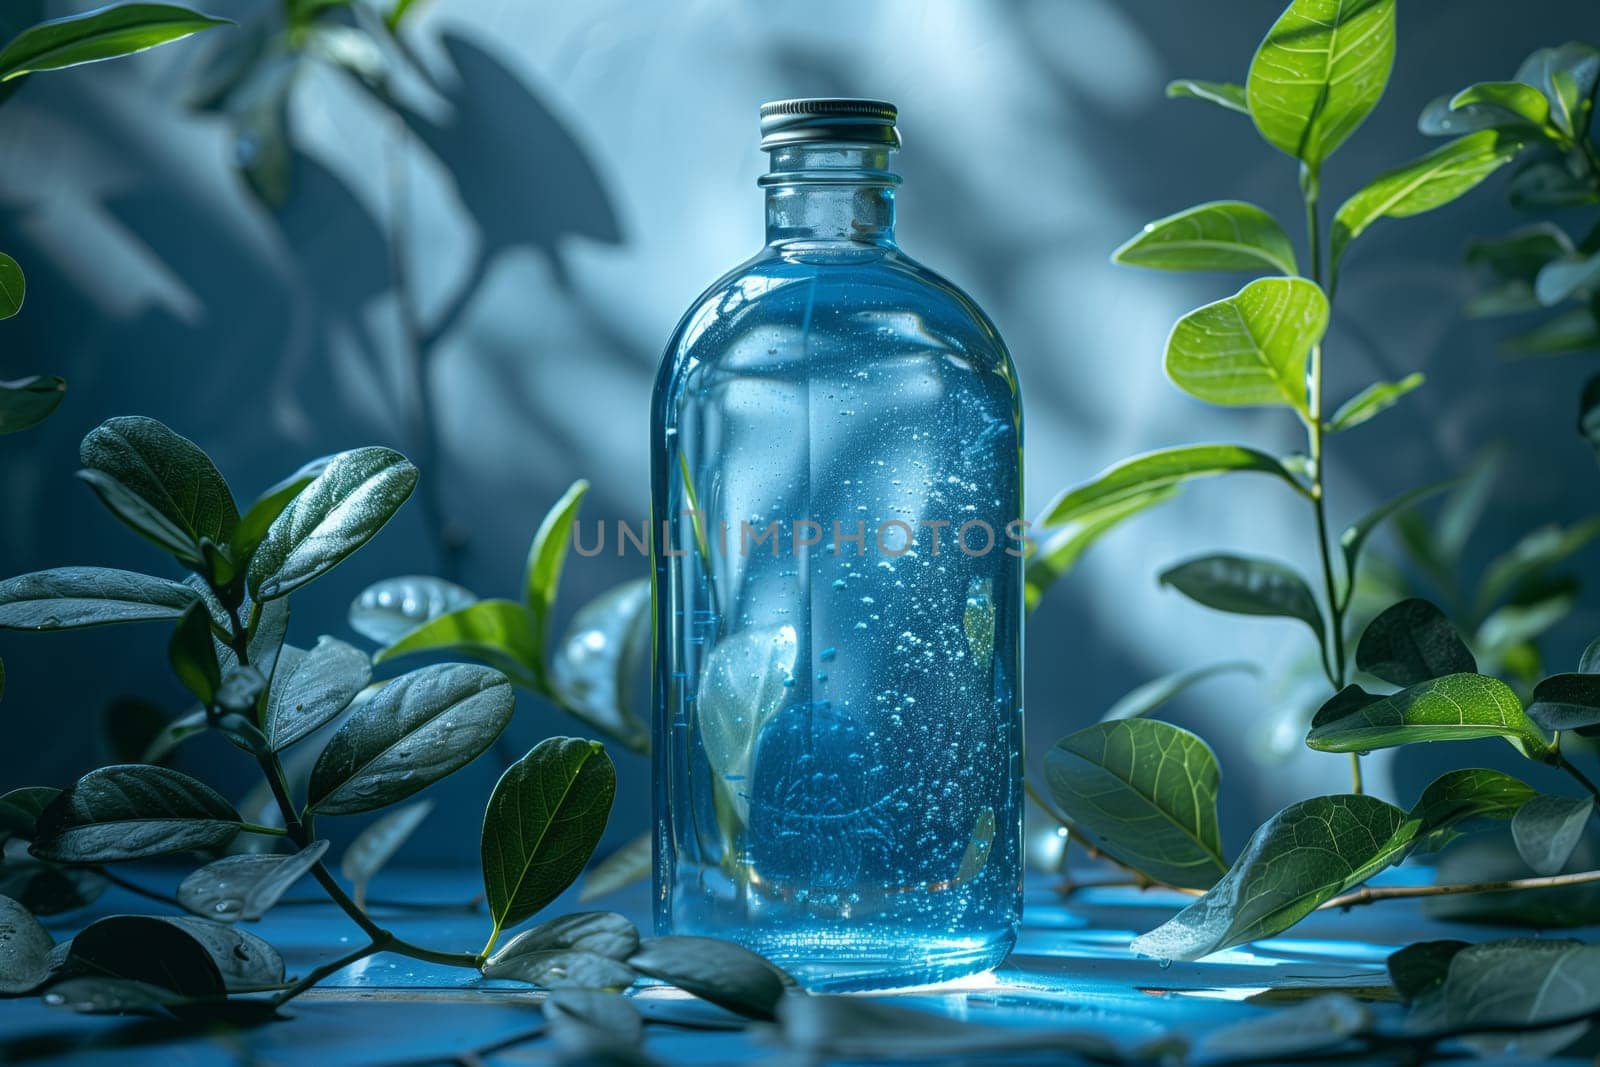 A plastic bottle containing liquid water is placed on a table surrounded by green leaves and twigs